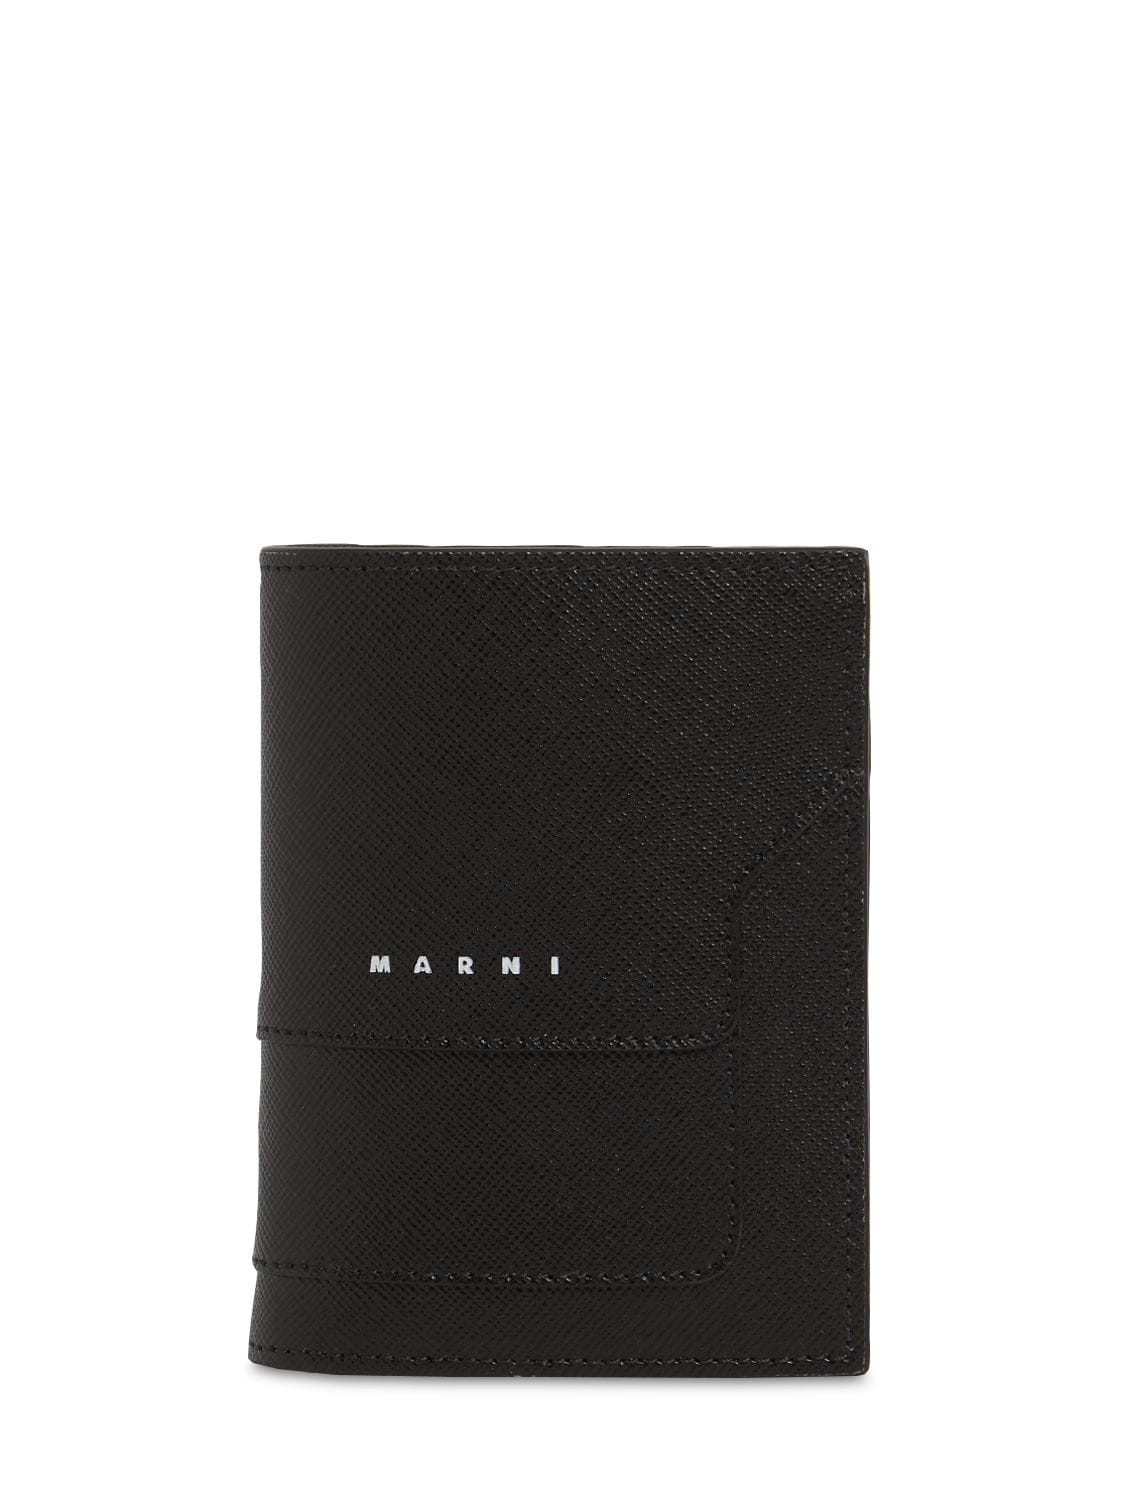 MARNI LOGO PRINT LEATHER COIN WALLET